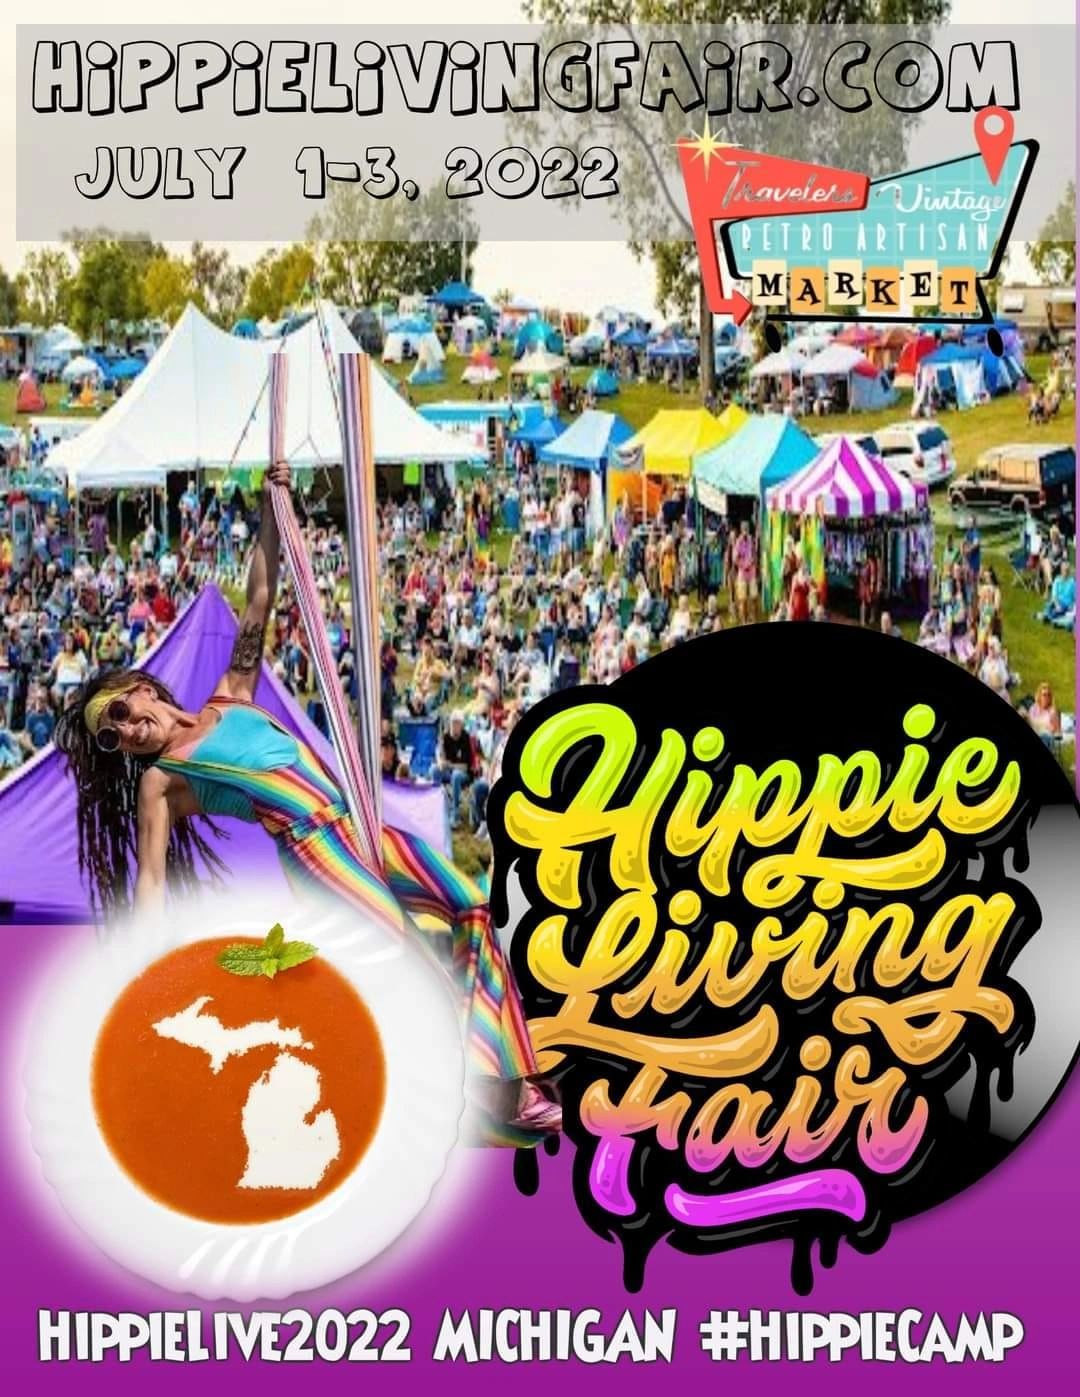 HippieCampers Traveling To Michigan Hippie Festival & Its Groovy